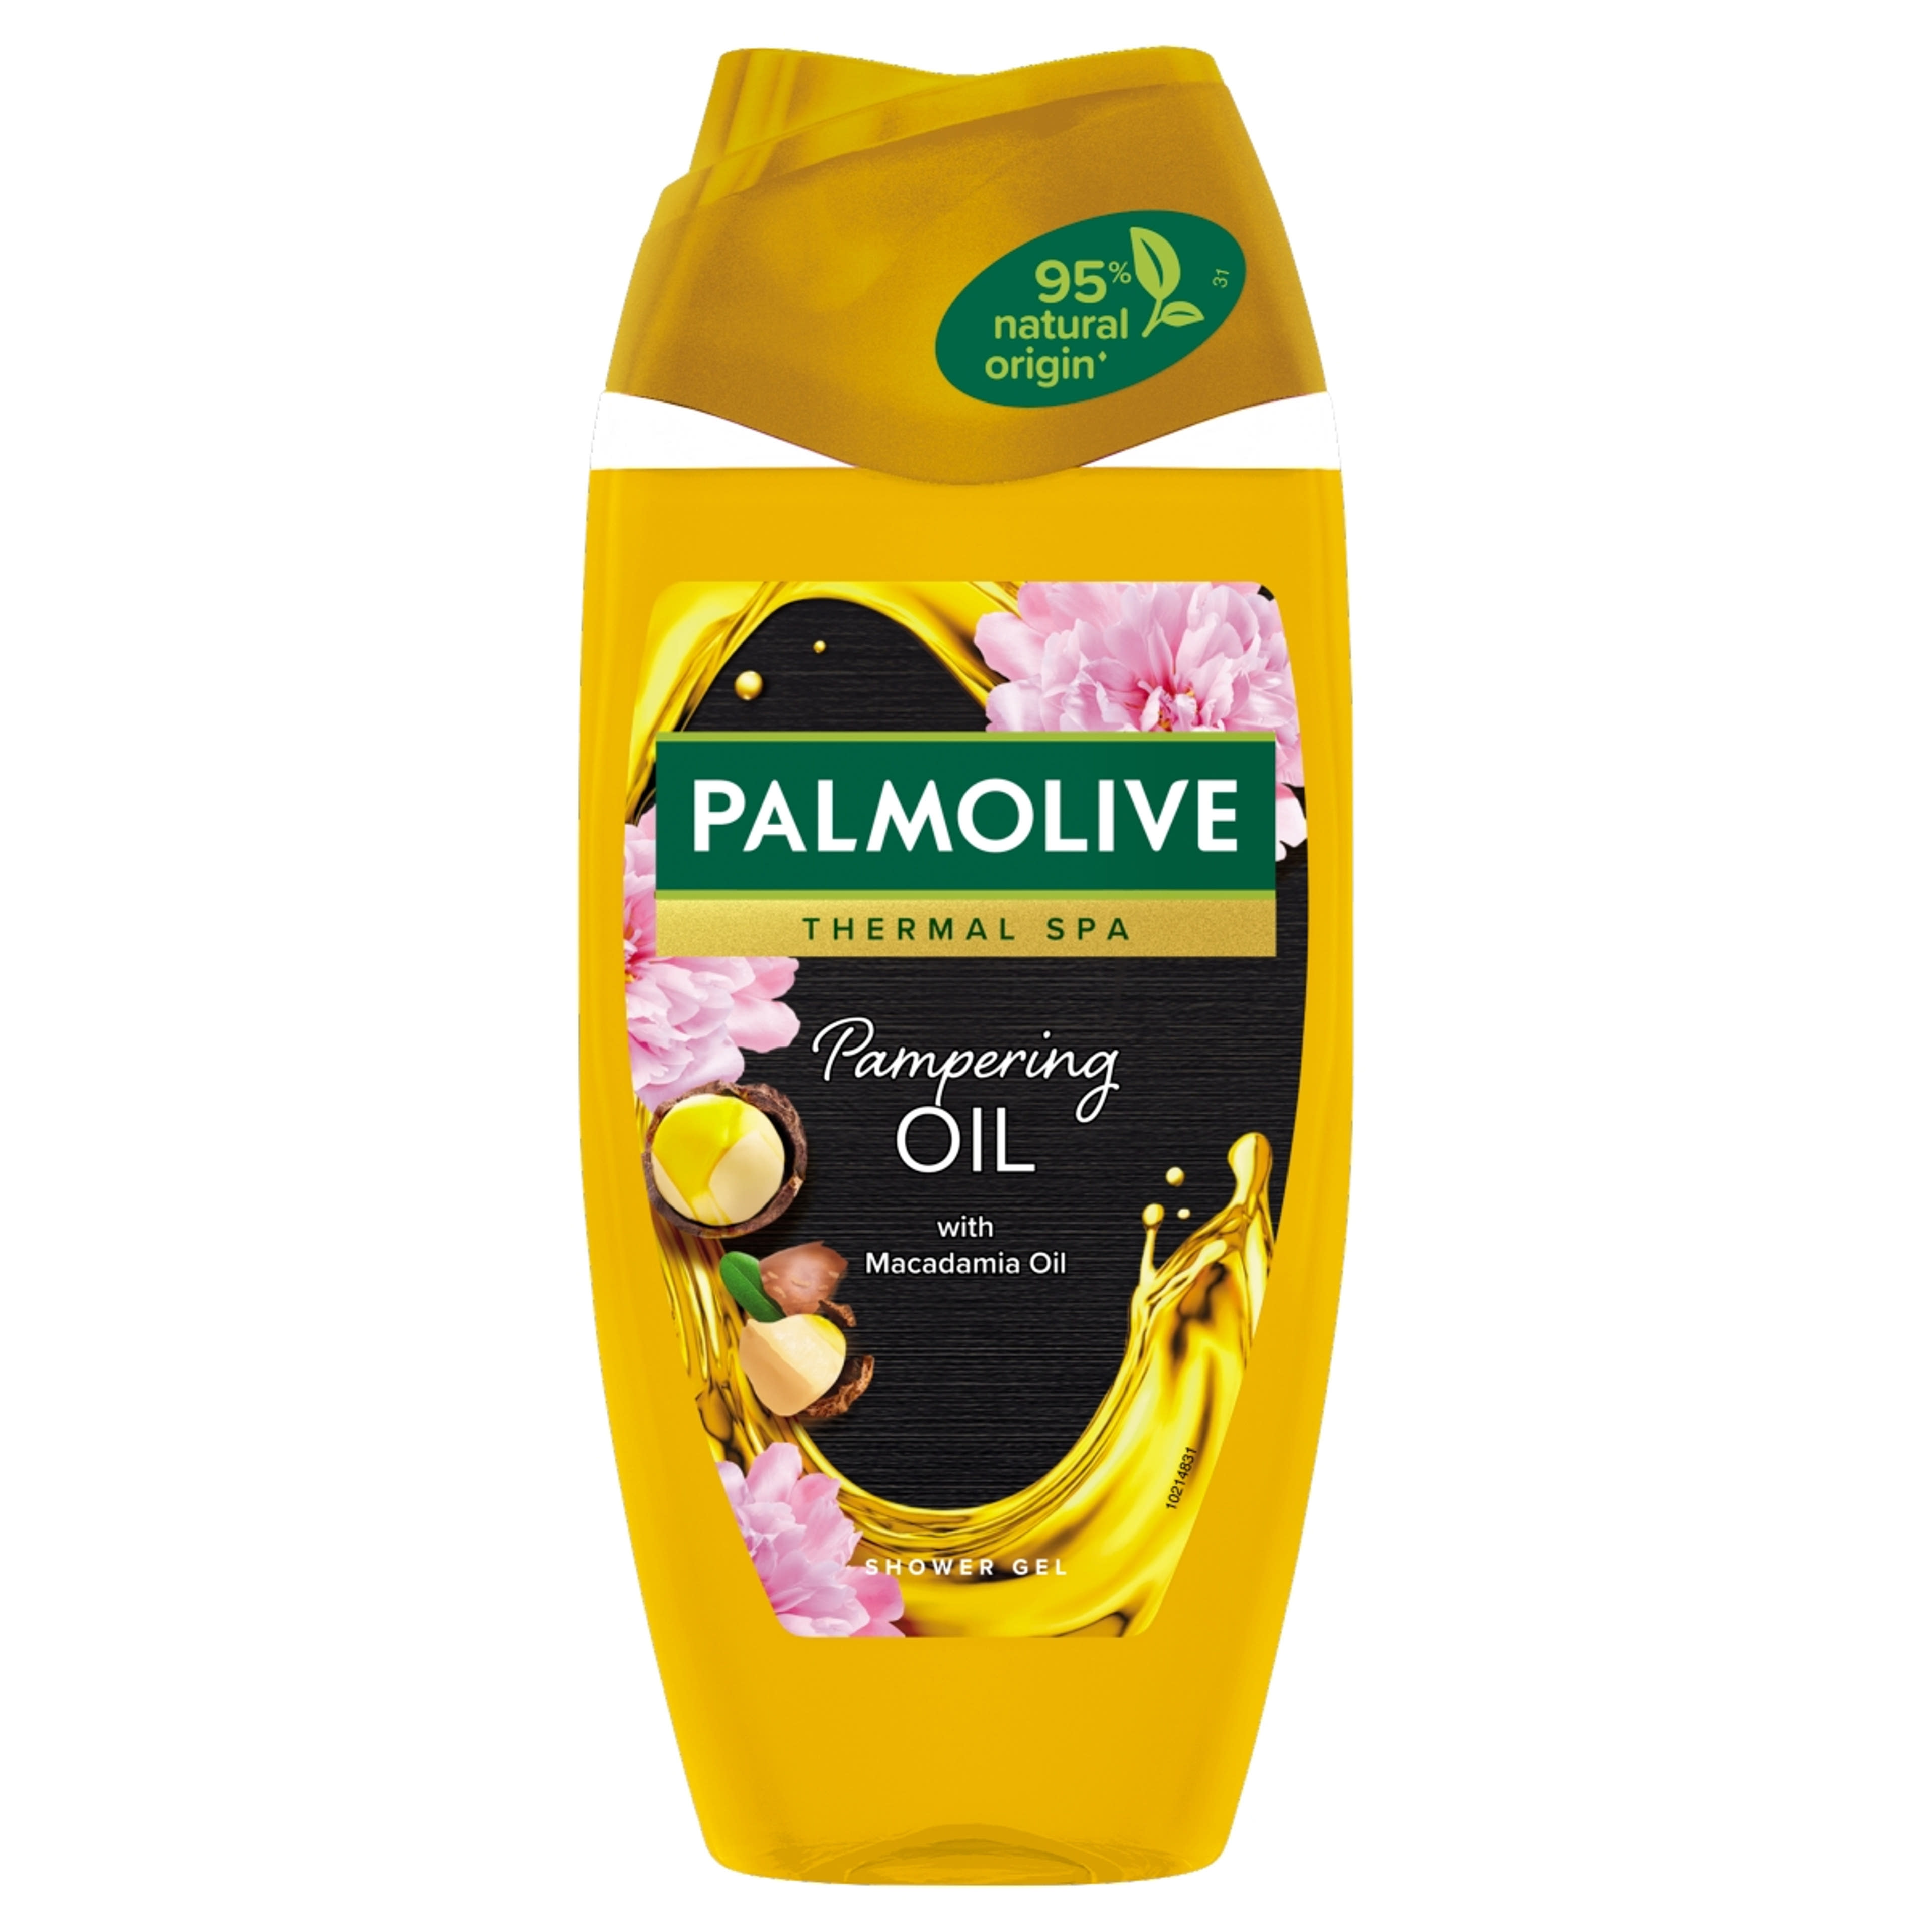 Palmolive Thermal Spa Pampering Oil tusfürdő - 250 ml